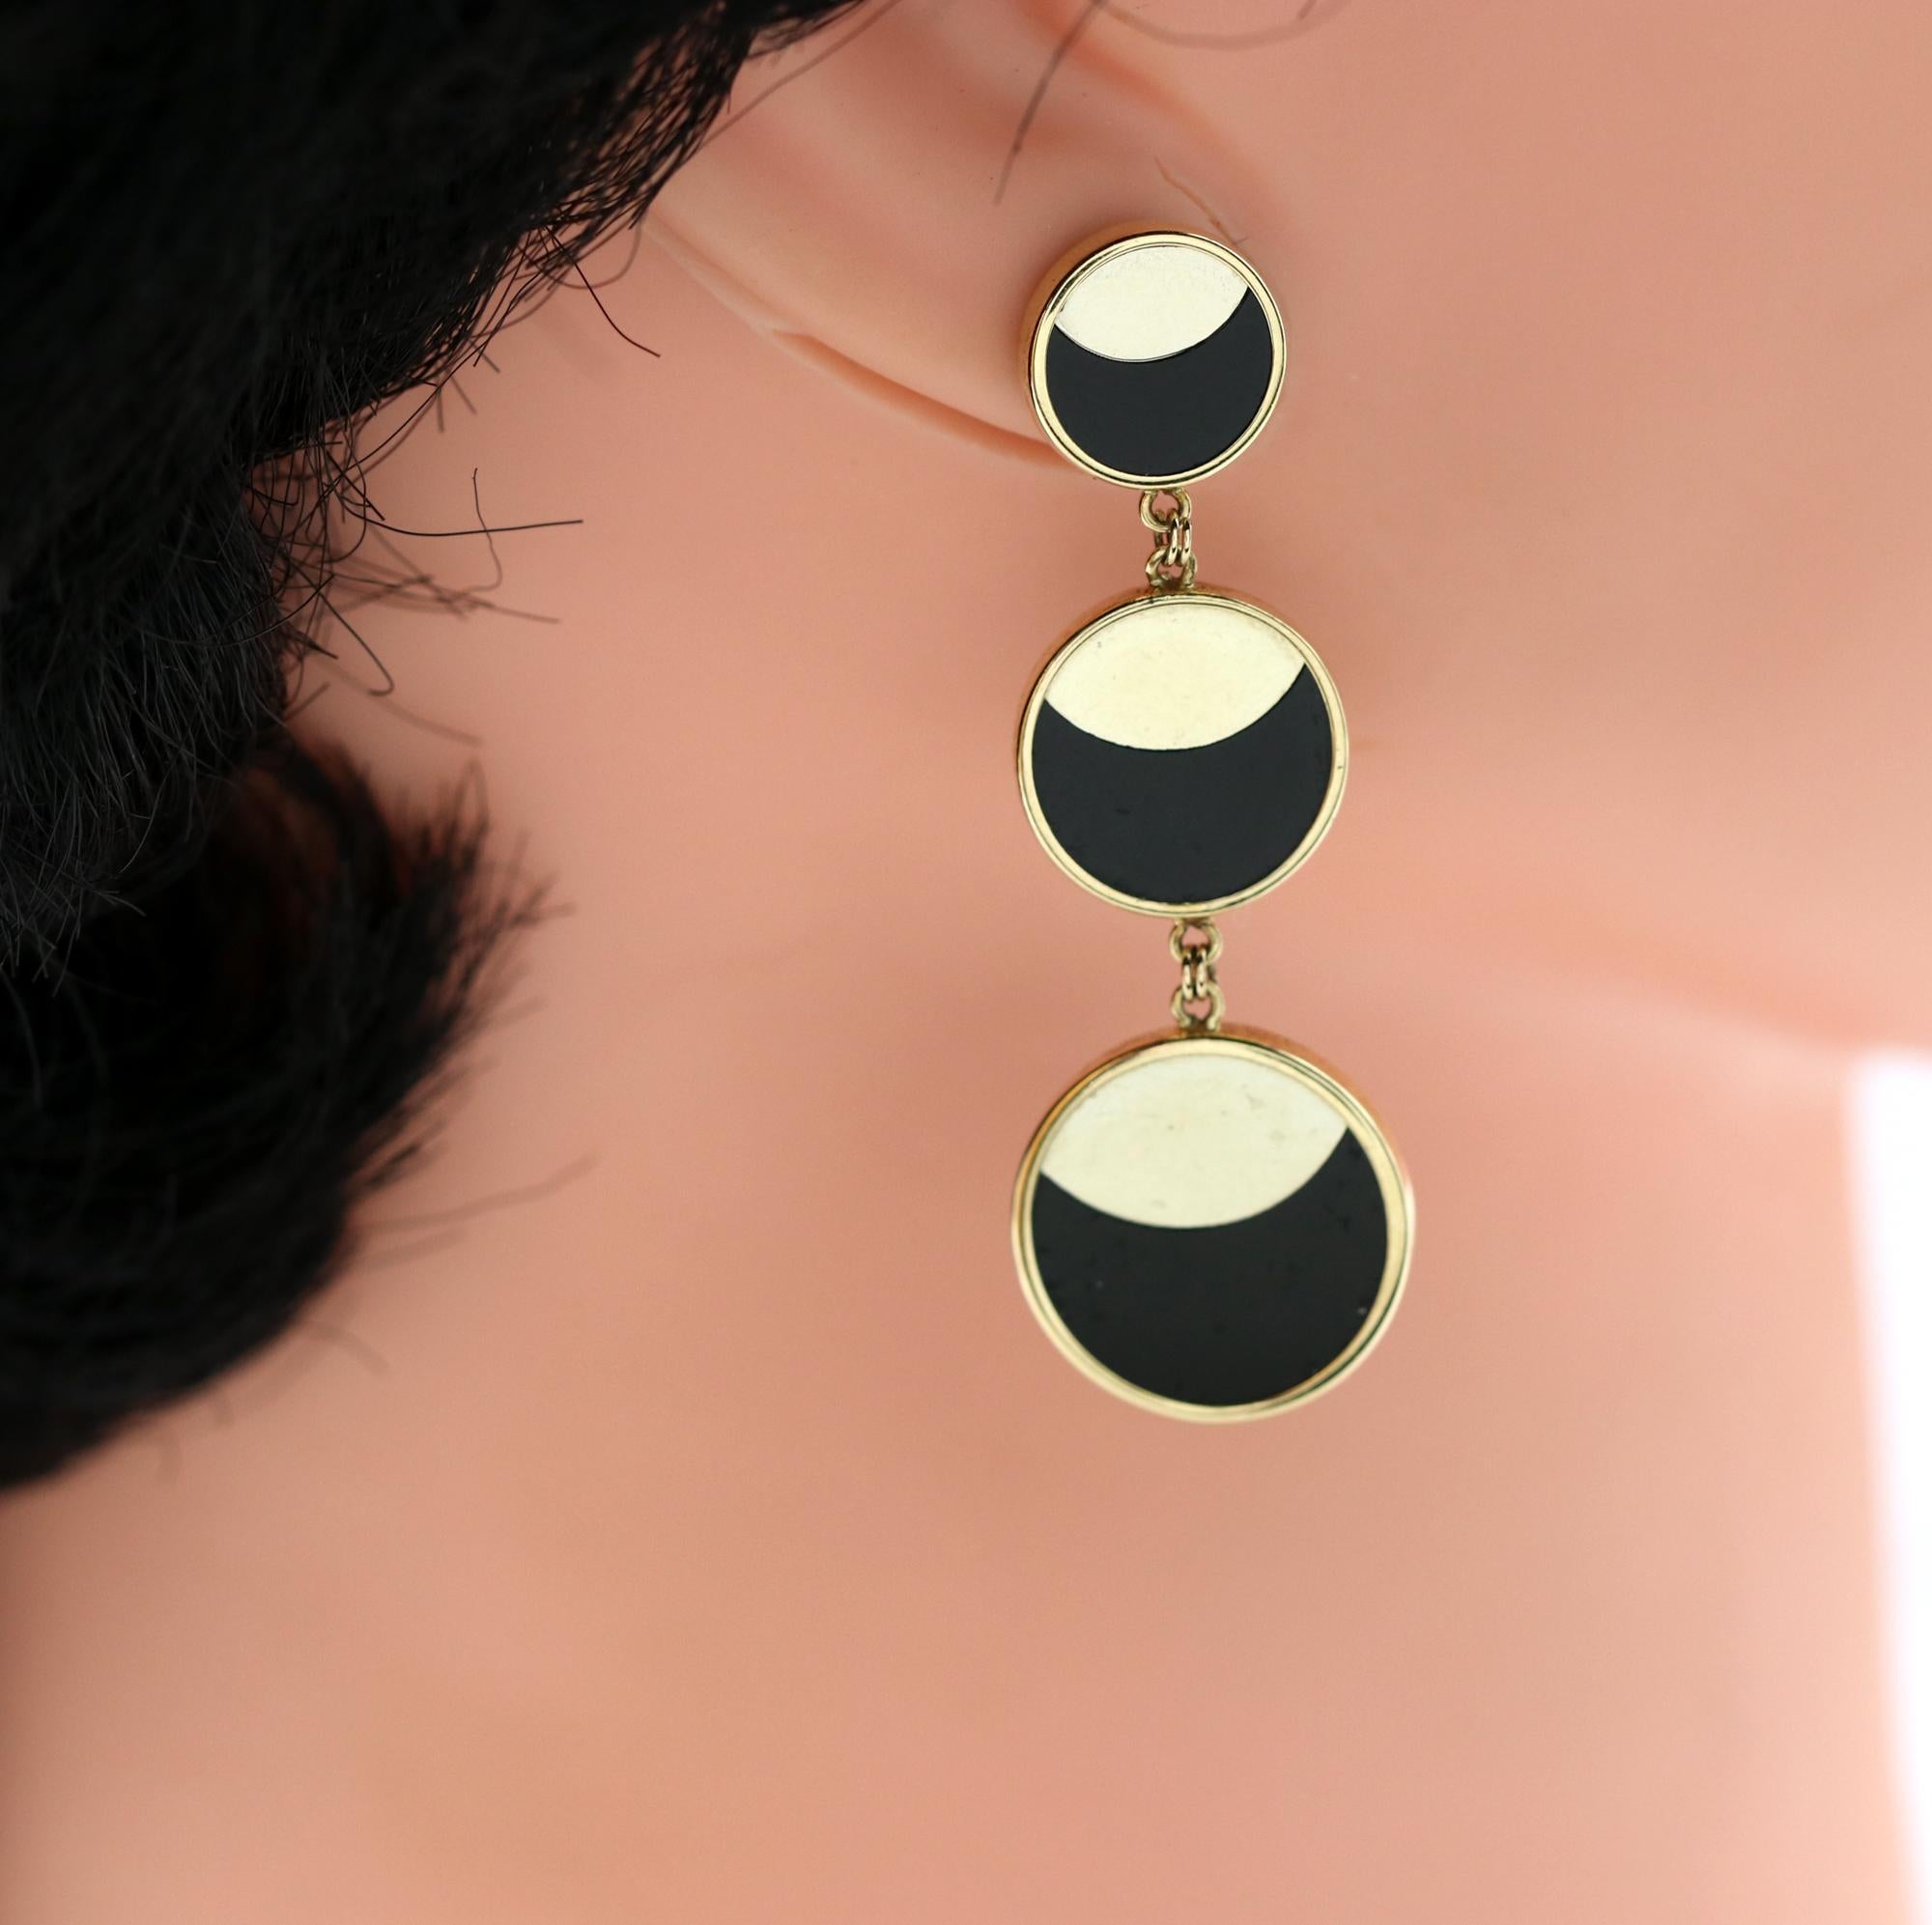 A pair of 14K yellow gold earrings with three discs graduating in size from 3/8 of an inch to 5/8 of an inch, to 3/4 of an inch. Each round station is set with onyx meeting beautifully with the gold to create a crescent moon design. Measuring 2